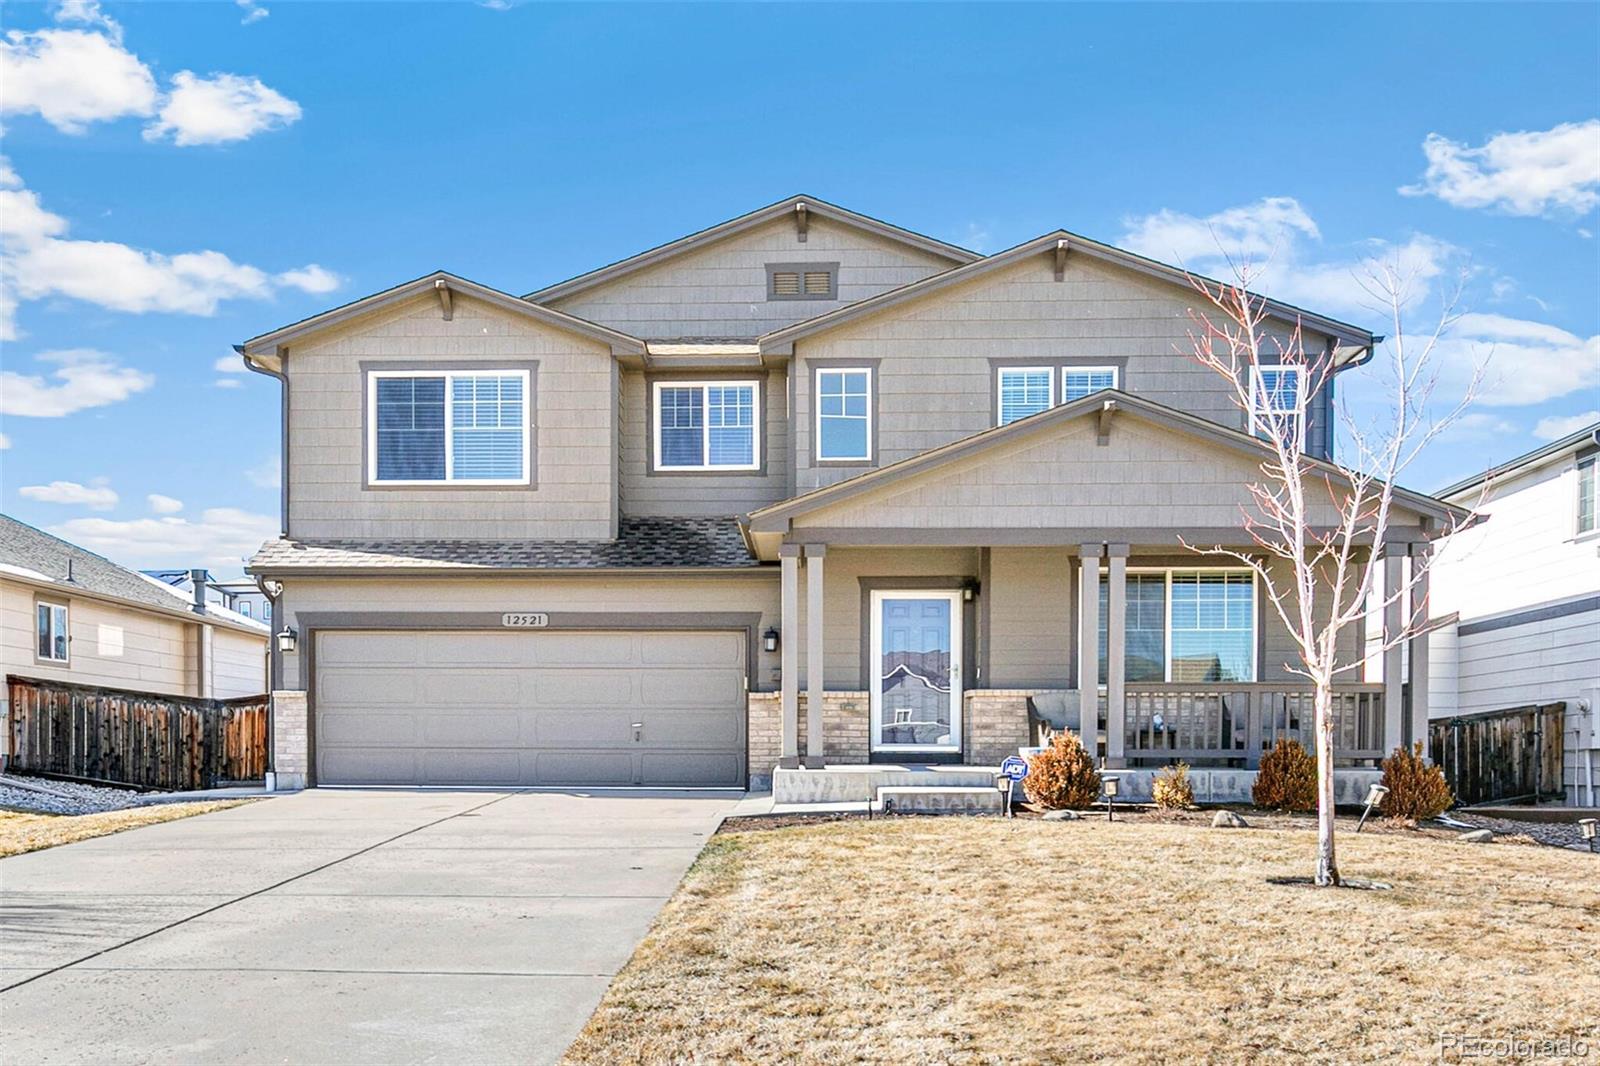 12521 s sopris creek drive, Parker sold home. Closed on 2024-04-05 for $601,000.